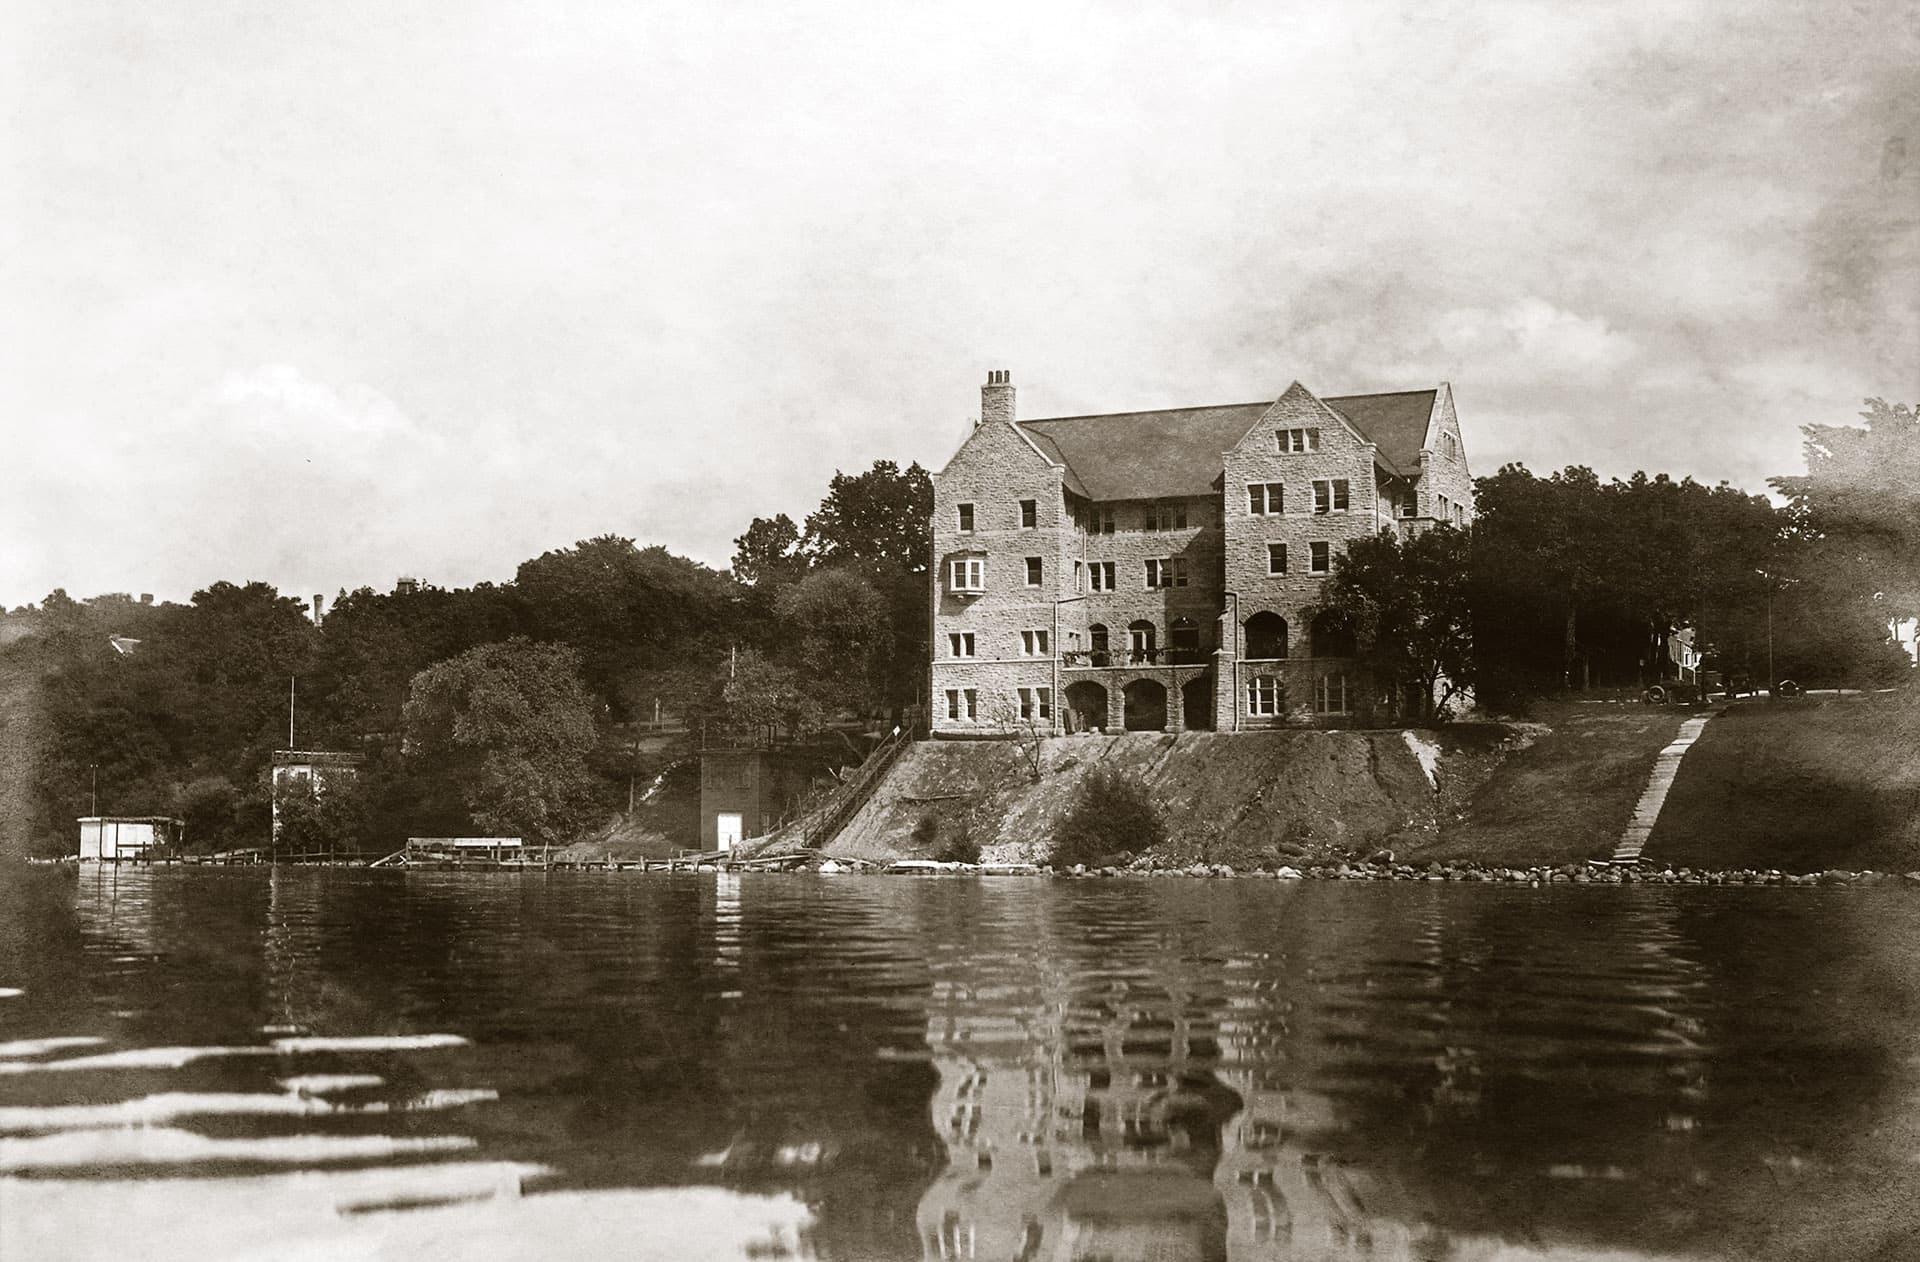 View of the Alpha Iota Lodge from Lake Mendota. Our Lodge was entered into the National Register of Historic Places in 1988.